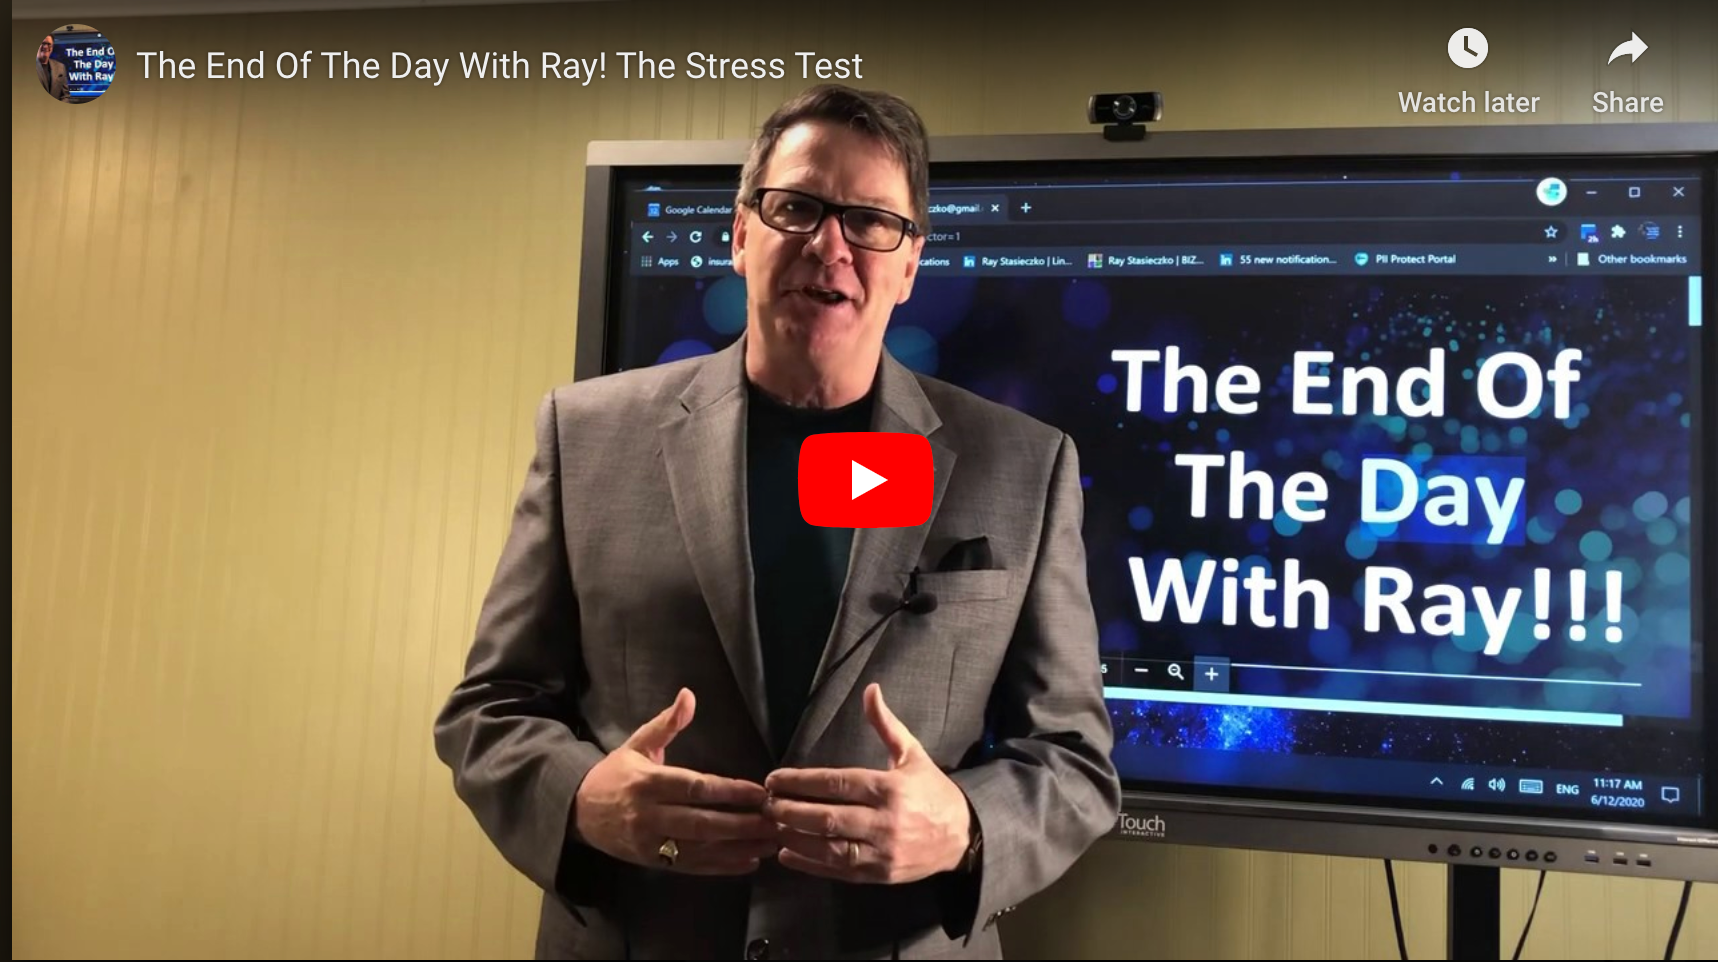 The End Of The Day With Ray! The Stress Test